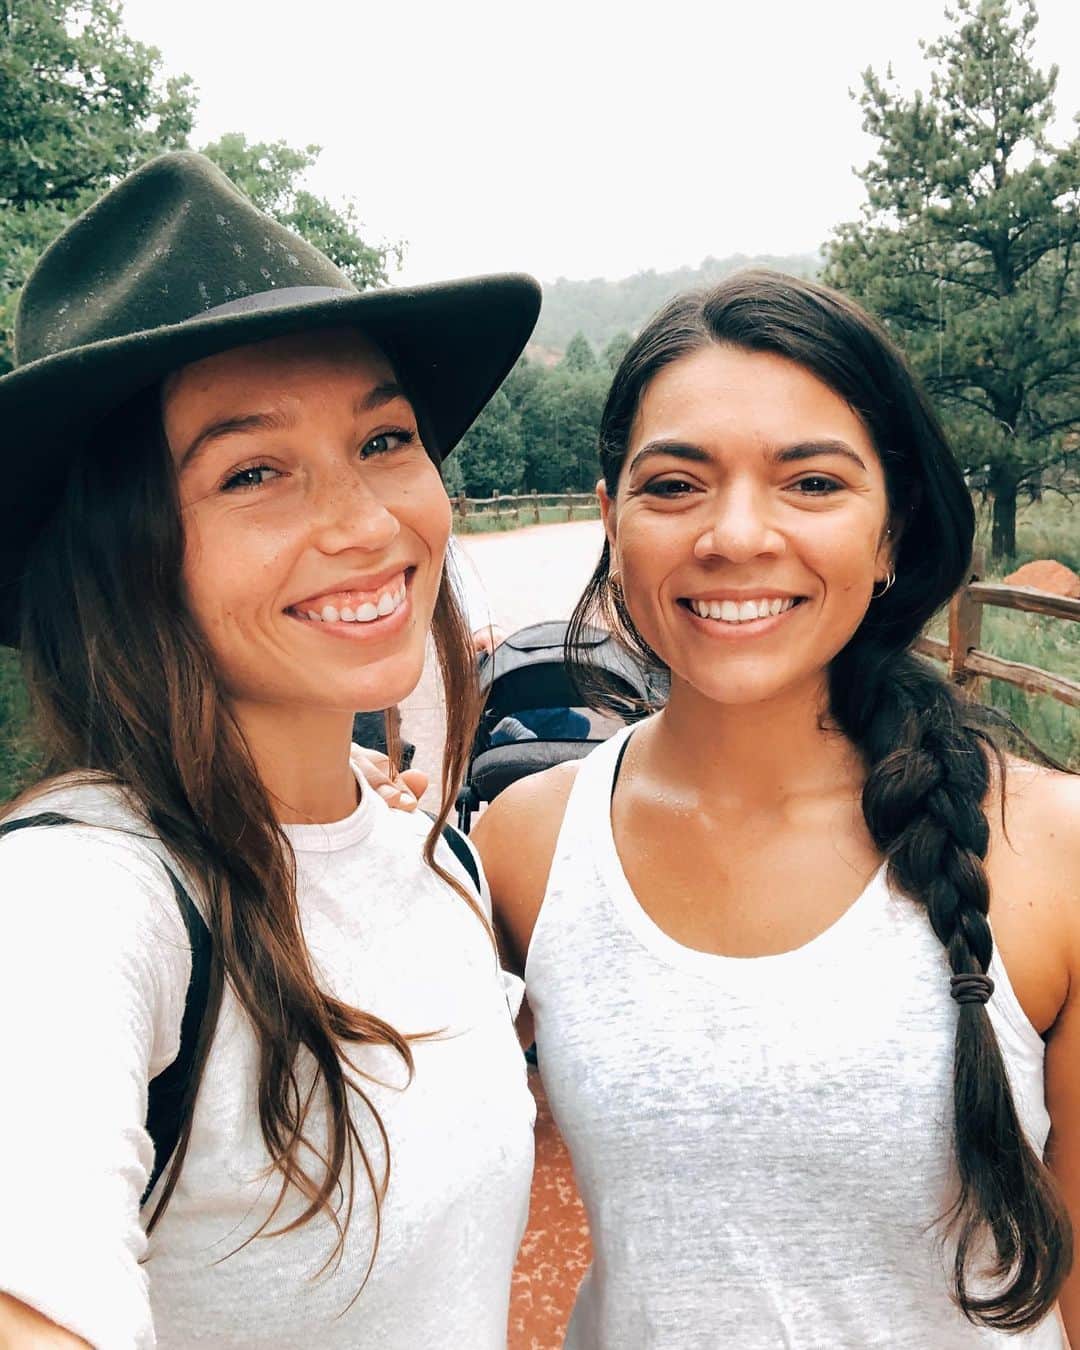 Nicole Mejiaさんのインスタグラム写真 - (Nicole MejiaInstagram)「Who wants to join me for a week in nature next year?🧘🏽‍♀️⛺️🏜  I’ll be leading a 5 day trip to Zion National Park, Utah September 12-16, 2021.  Spots open tomorrow at 12:00pm ET exclusively to those who requested to receive first access! You can get on that list in my story.🙃  We are glamping with @undercanvasofficial!  Trip itinerary:  Day 1️⃣: Sunday, Sept 12 - Arrive in Vegas and take a 12pm or 3:30pm complimentary transfer to the campsite - Tent check-in and gift bags - Welcome dinner  Day 2️⃣: Monday, Sept 13 - Morning movement and meditation - Breakfast on site - 1/2 day canyoneering trip - Women’s circle (more deets to come!) - Lunch and dinner provided  Day 3️⃣: Tuesday, Sept 14 - Morning movement and meditation - Breakfast on site - It’s a free day! Hike, relax, explore! - Group dinner  Day 4️⃣: Wednesday, Sept 15 - Morning movement and meditation - Breakfast on site - Optional kayak or paddle board session - Women’s circle (more deets to come!) - Farewell dinner - S’mores, drinks, and a sunset dance party 🌄  Day 5️⃣: Thursday, Sept 16 - Morning flow and gratitude meditation - Breakfast on site - Transfer to airport at 10:00am (why did i just get sad at the thought of it ending!?! 😭)  I’ll launch to insta and our @lulyapp community on Monday if there are spots left!  Ps. @noelle_m & @bekindtothemind will be present as well! 💓🙏🏼  A few more deets: - price for the first 10: $1988 - price for the remaining 20: $2188 - The first 10 people to register will get $200 off.  - 25% of the total price is due upfront to reserve your spot. - For the remaining balance, you have the option of paying with a 6, 12, or 18 month payment plan. - flights are not included but transportation from Las Vegas McCarran airport to the park are. - All meals are included minus 2 lunches since most of us will be out exploring! - there will be veggie and vegan options available.   I just got so hype writing this out. 😍 Connecting with nature has become the most authentic and soul-filling part of my life these days. I am filled with gratitude to be able to share in it with 30 women from this community.  Thank you for making this possible, @trovatrip. ✨」10月23日 10時20分 - nicole_mejia